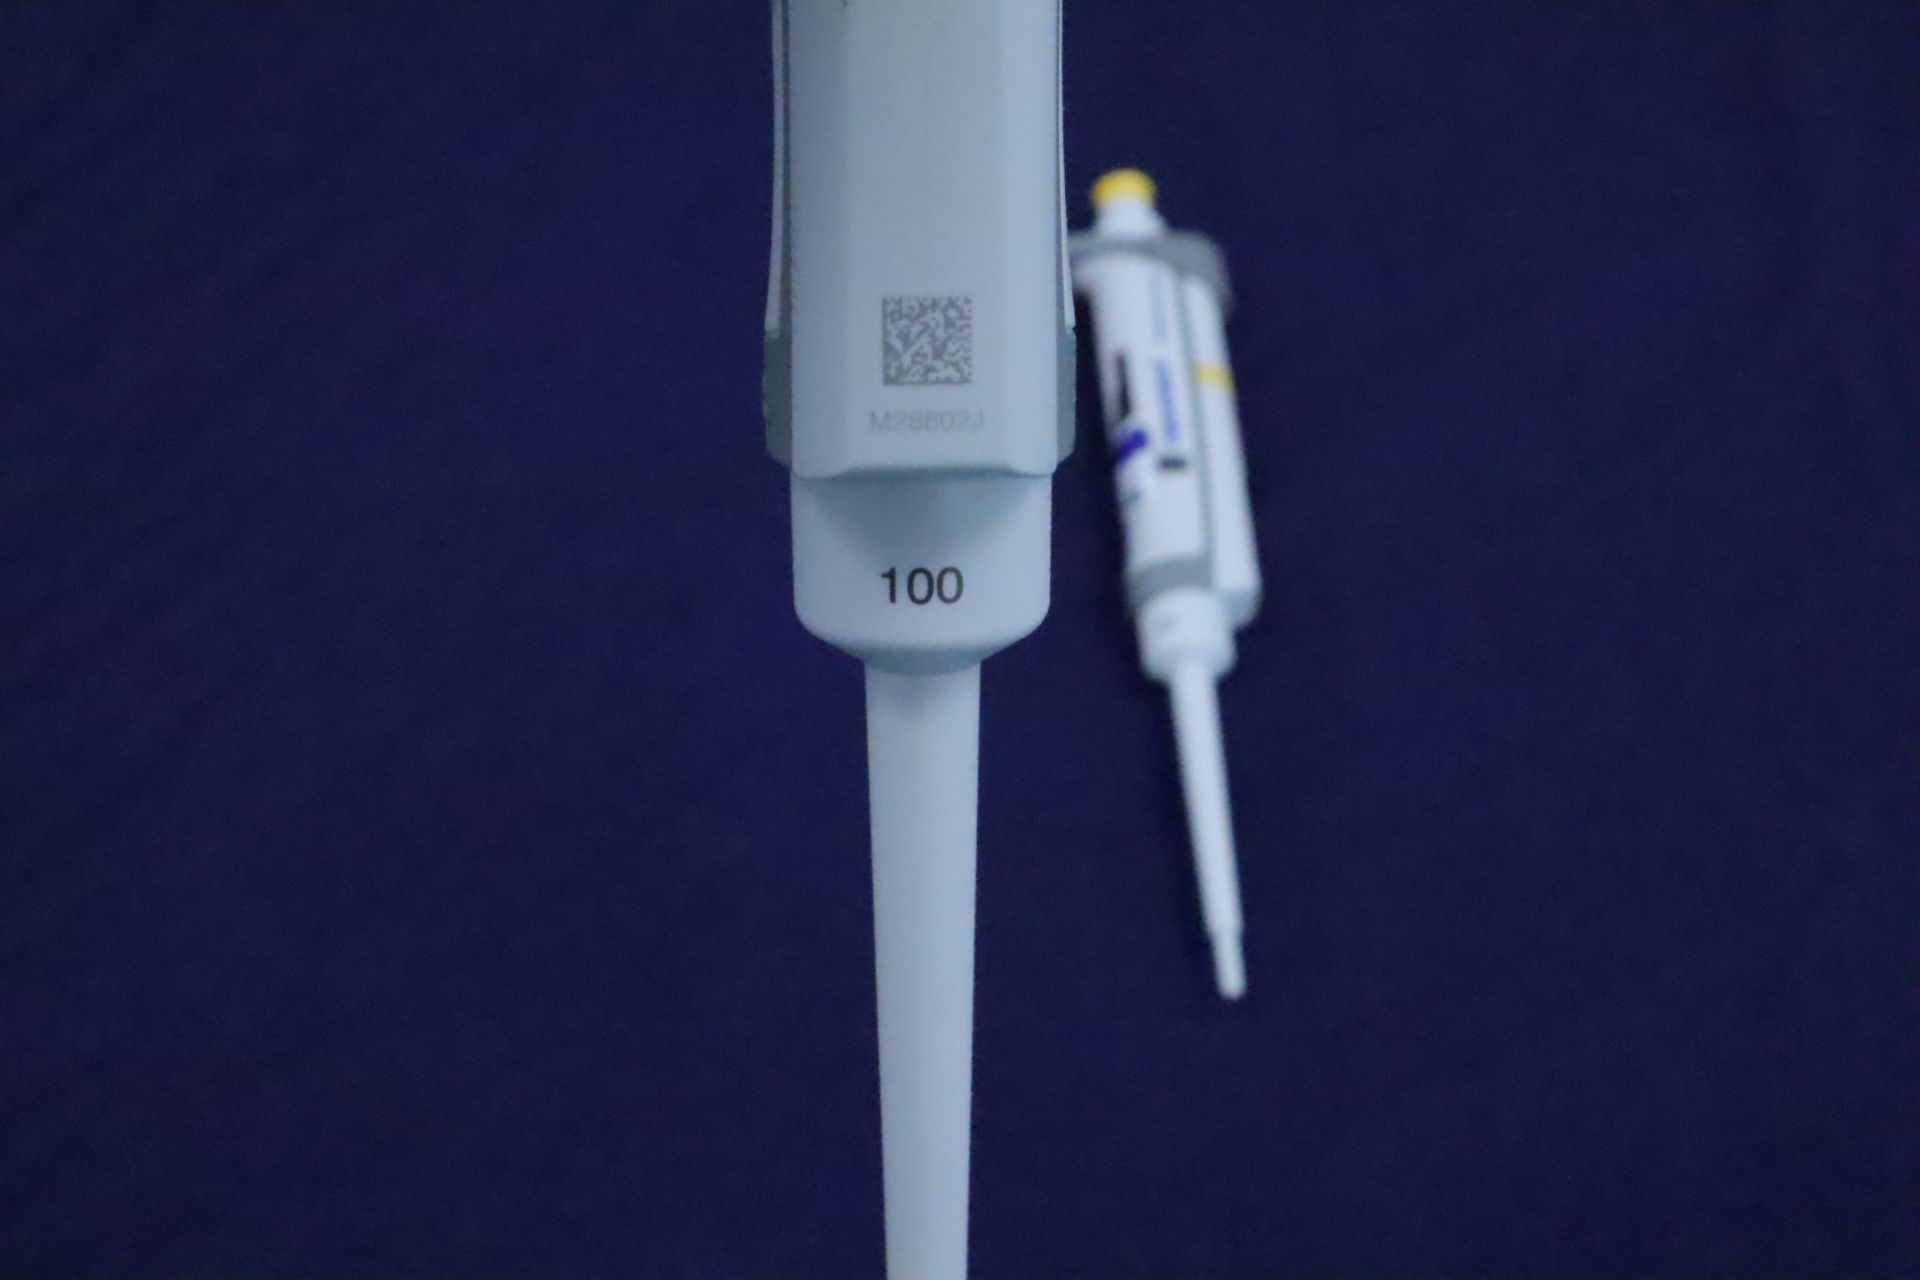 Eppendorf Research Plus Adjustable Volume Pipette 2-20 uL & 10-100 uL - Image 4 of 8